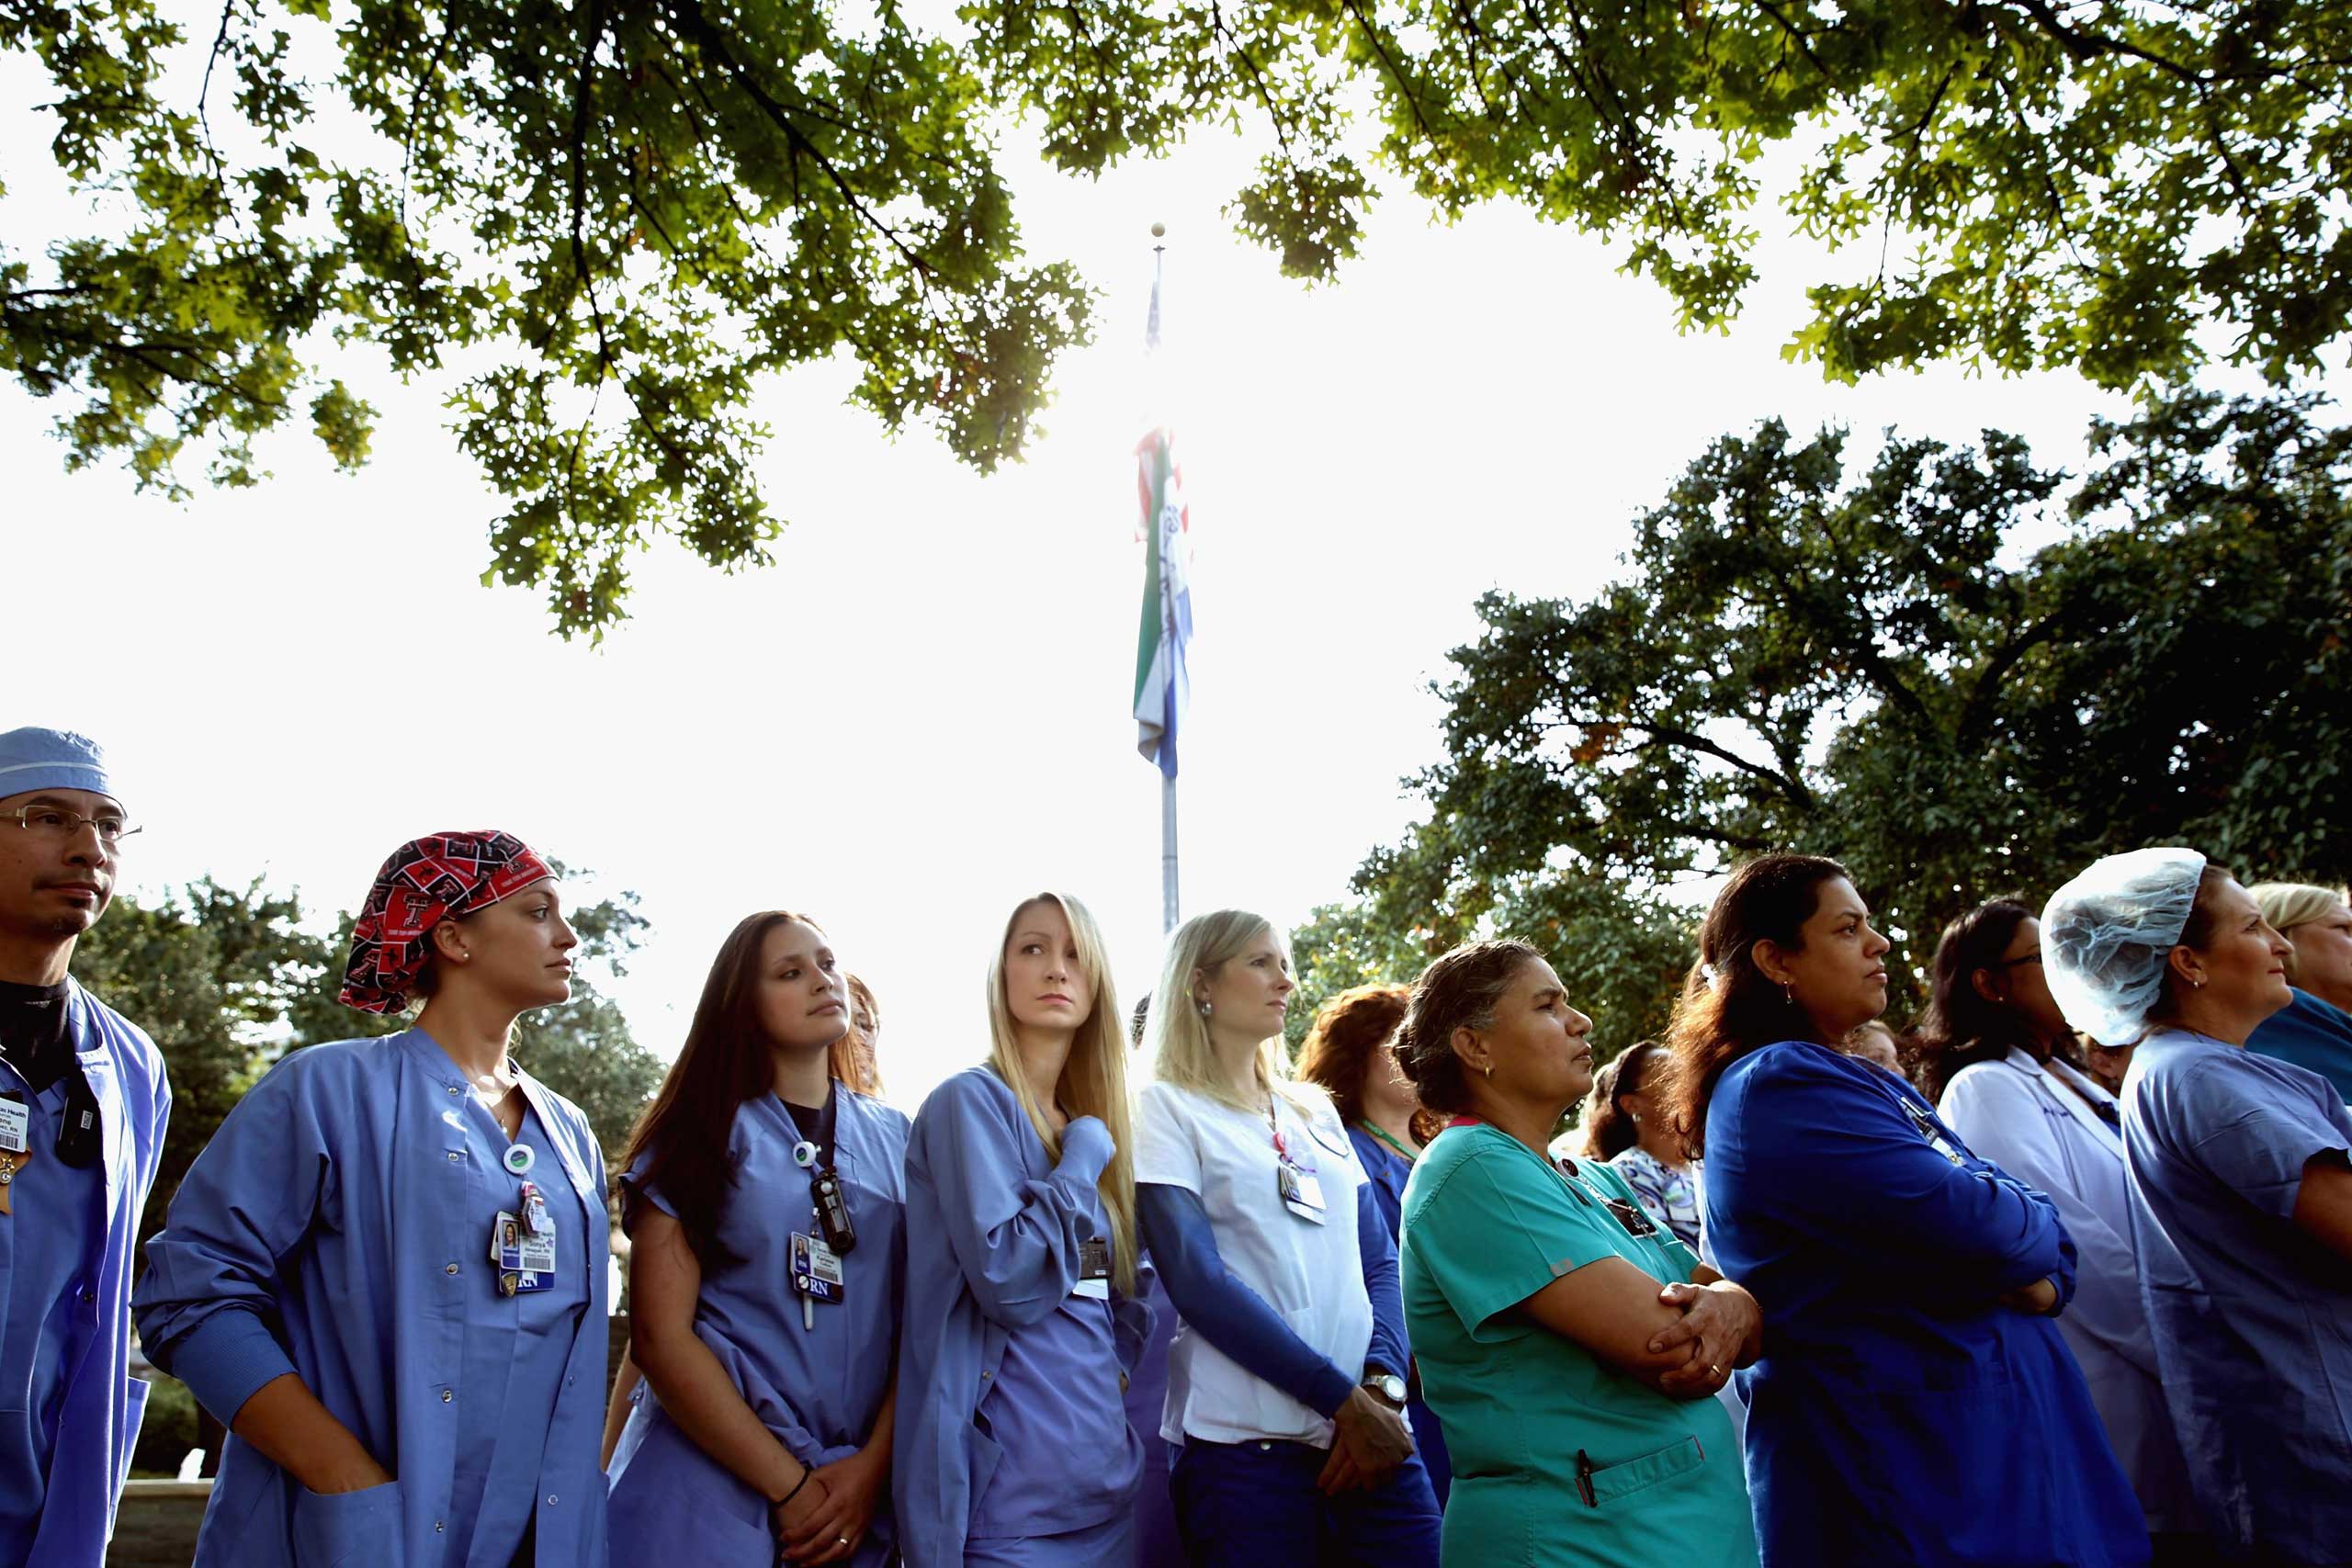 Several dozen nurses from Texas Health Presbyterian Hospital gathered in front of the hospital to show support for their employer, Oct. 20, 2014 in Dallas. (Chip Somodevilla—Getty Images)